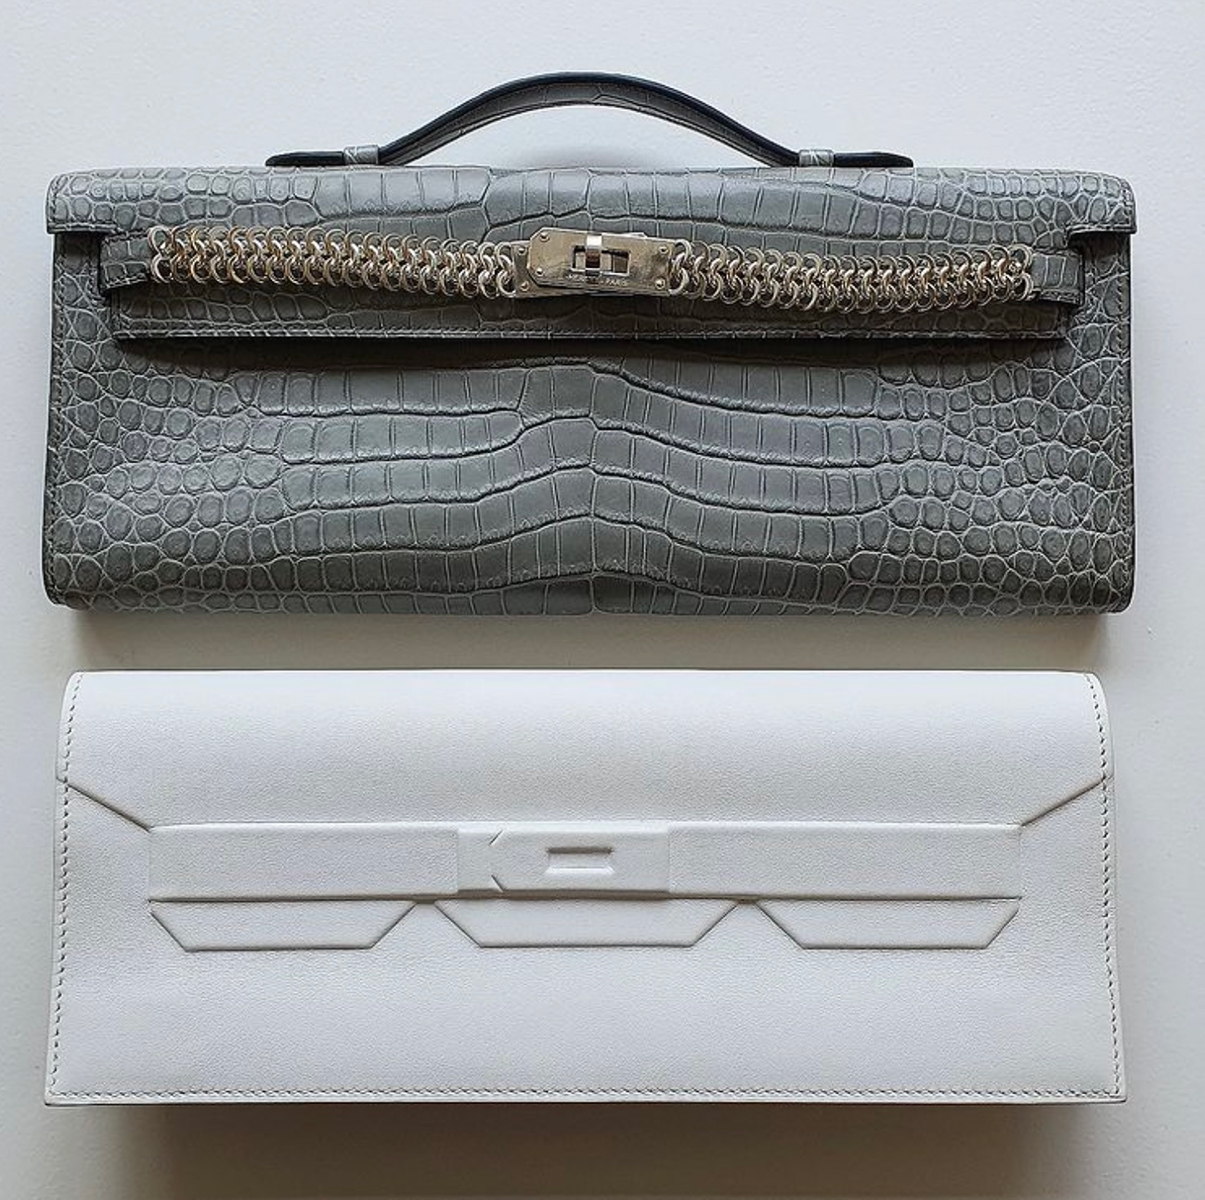 A reimagined Kelly Cut and Shadow Clutch. Photo courtesy of @TheBagHag.